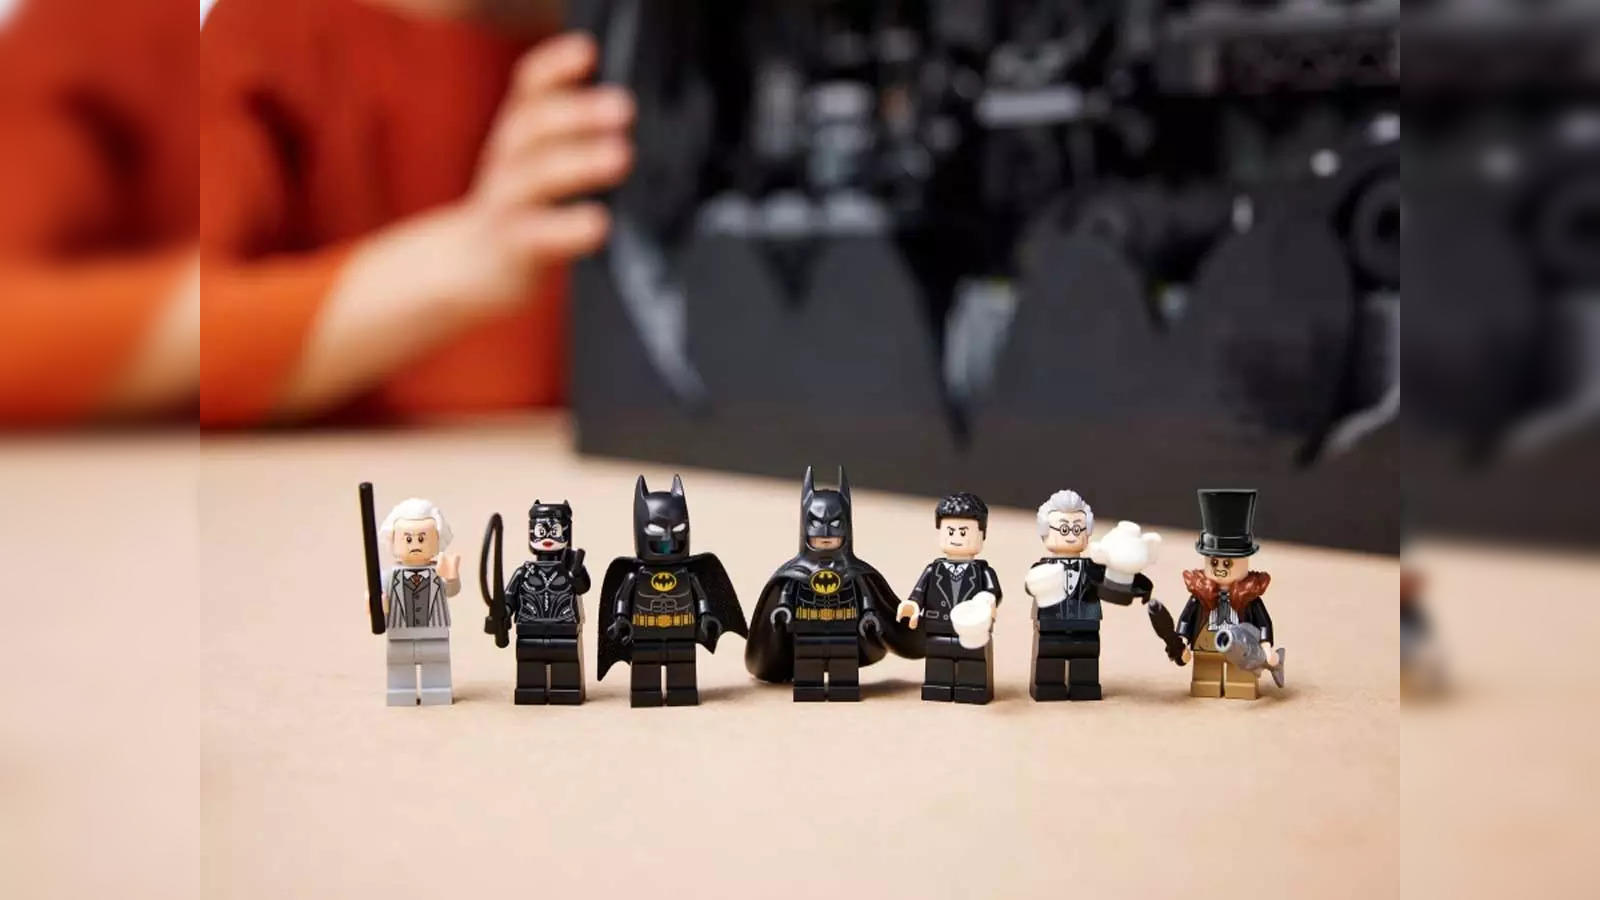 Lego is releasing an incredible 3,981-piece Batcave from Batman Returns -  The Verge